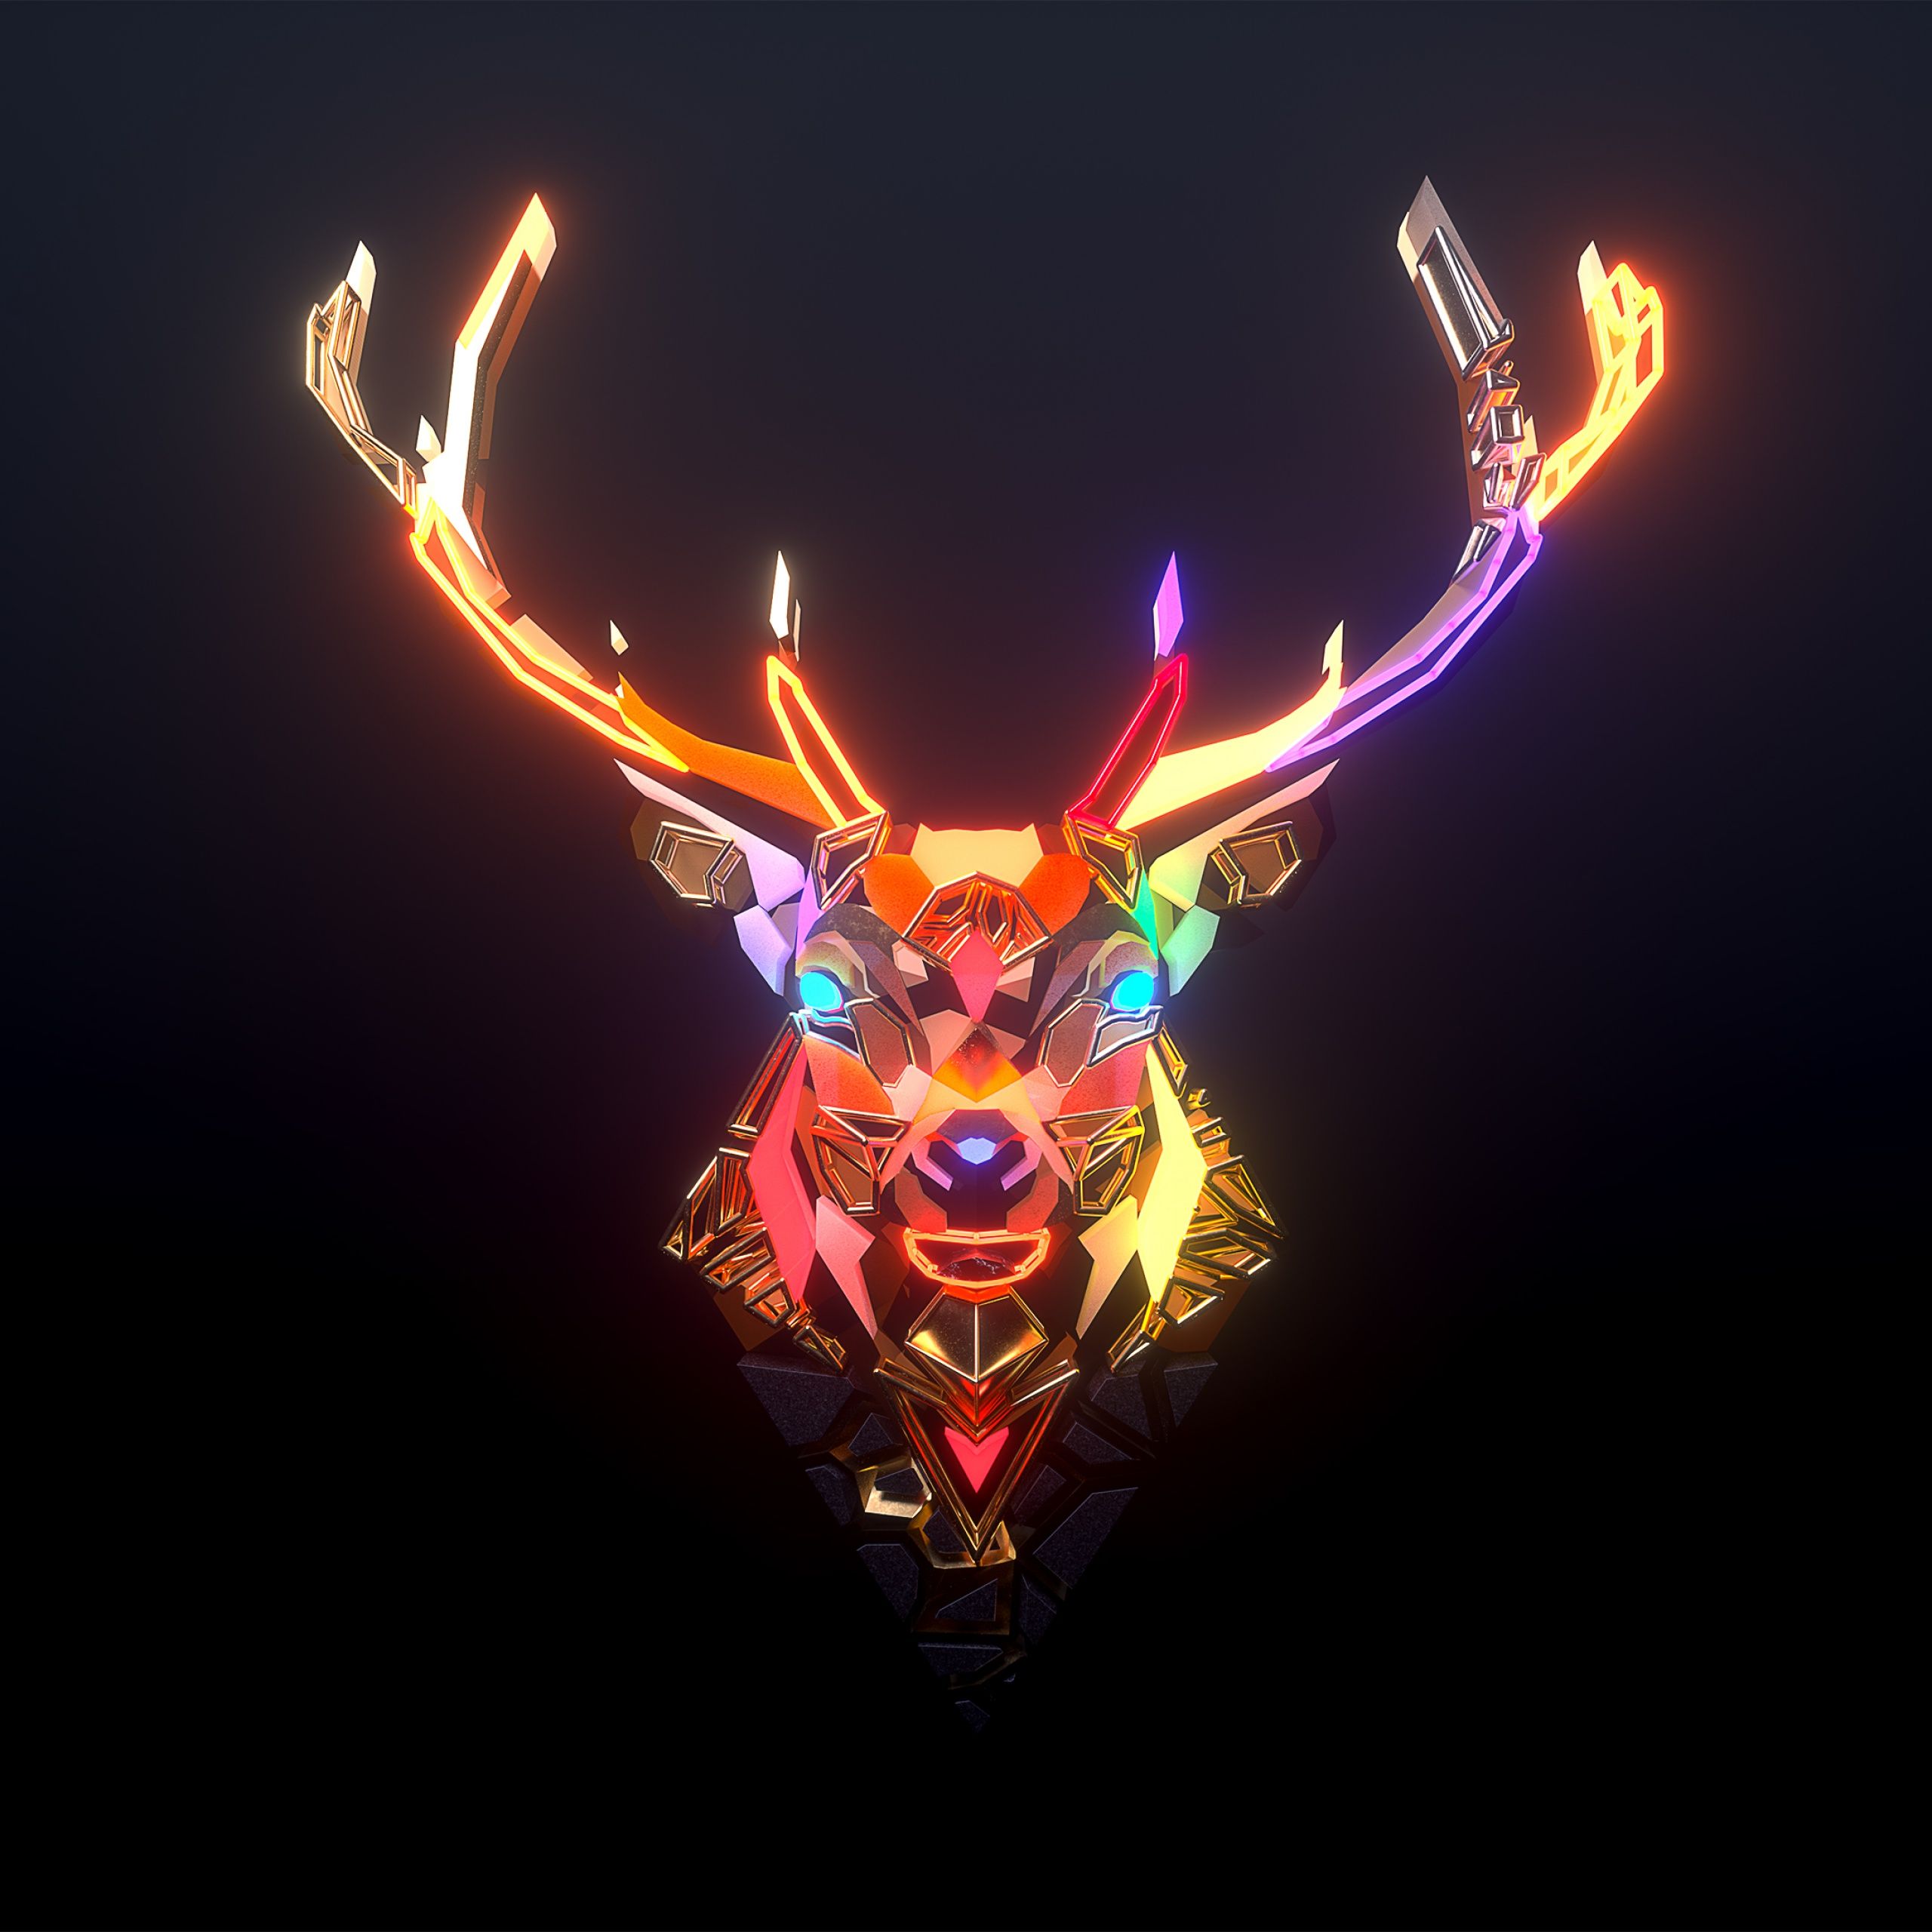 A low poly illustration of a deer head with glowing eyes and antlers - Deer